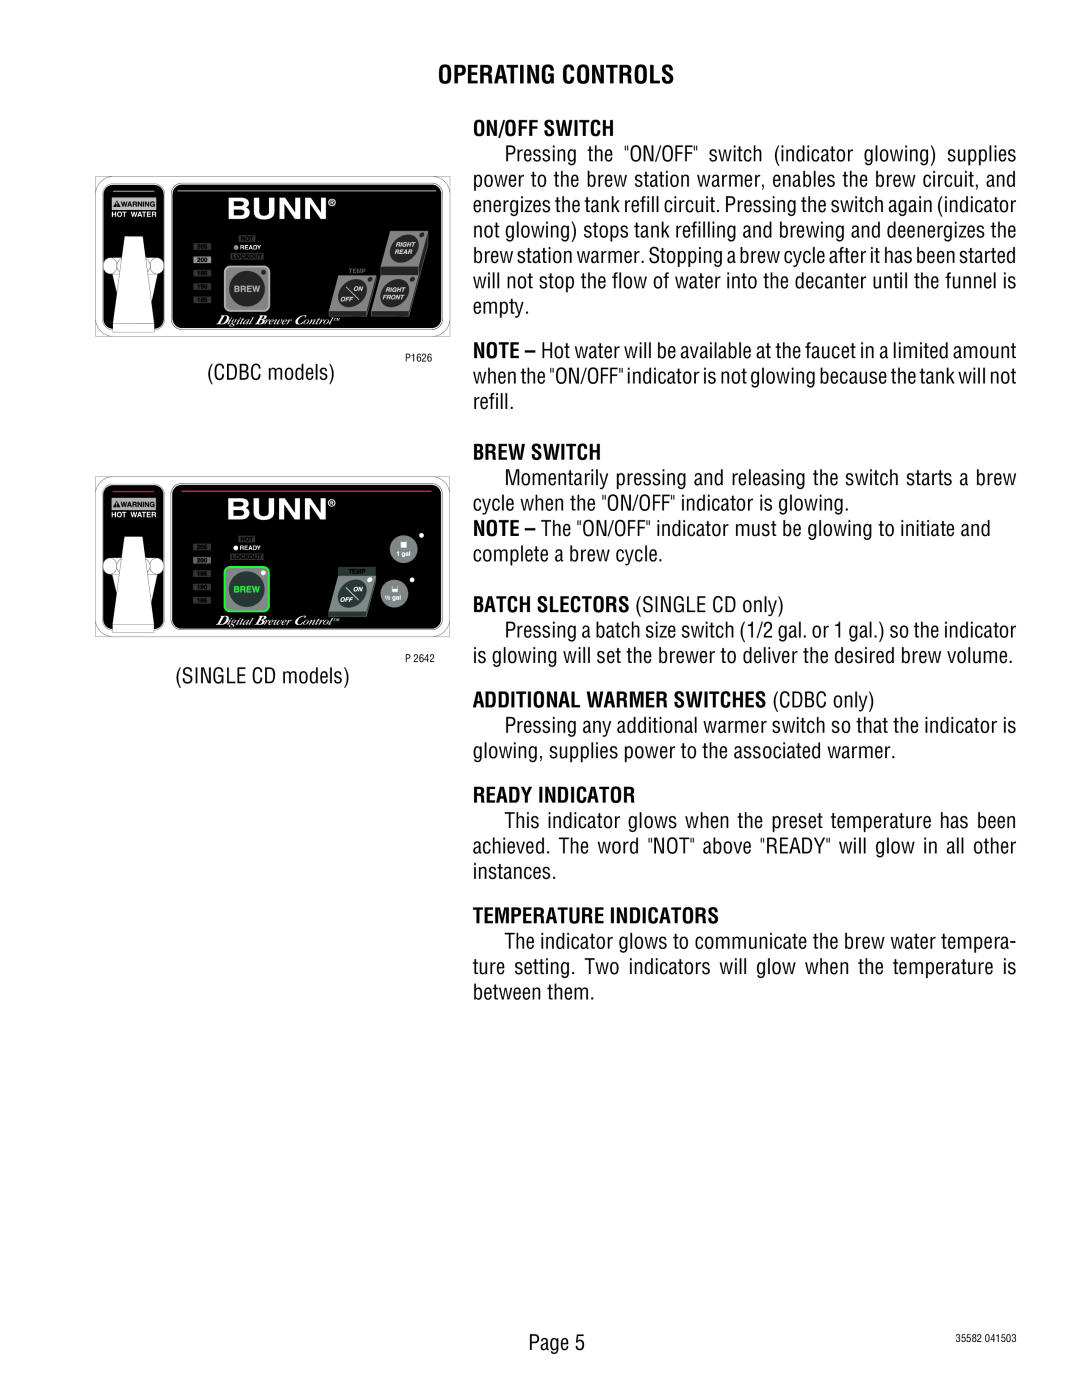 Bunn CDBCFP Operating Controls, On/Off Switch, Brew Switch, ADDITIONAL WARMER SWITCHES CDBC only, Ready Indicator 